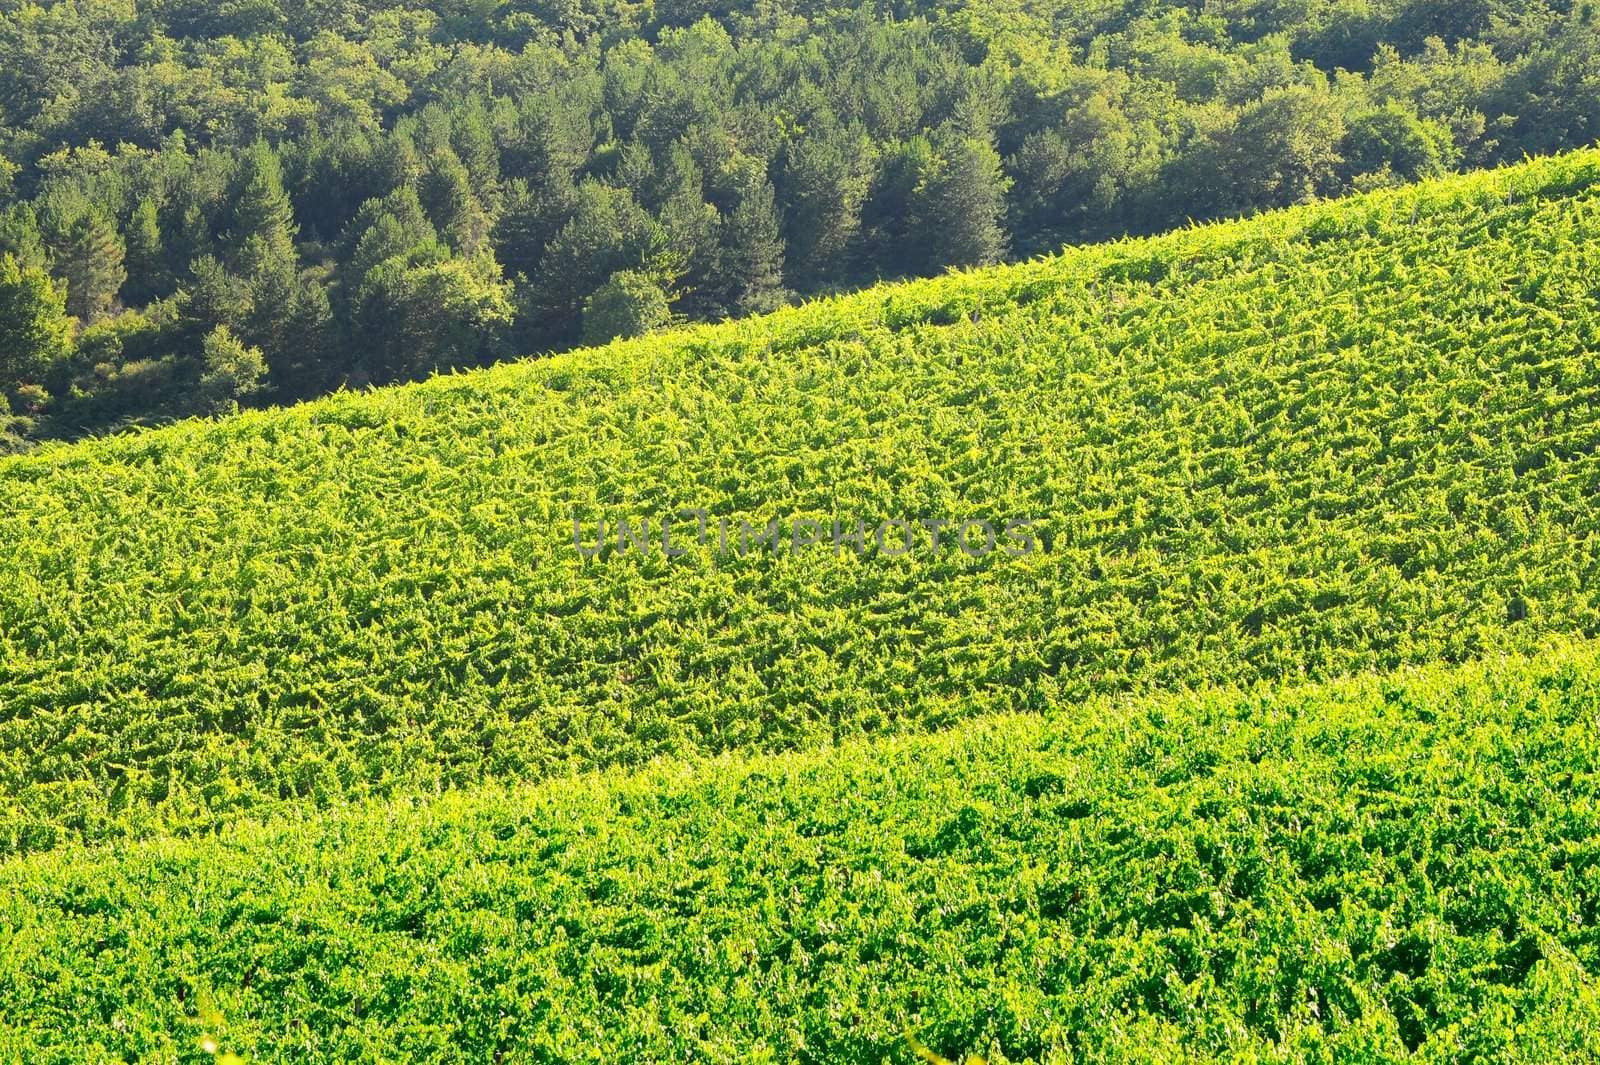 Natural Background Of Vineyard In The Chianti Region